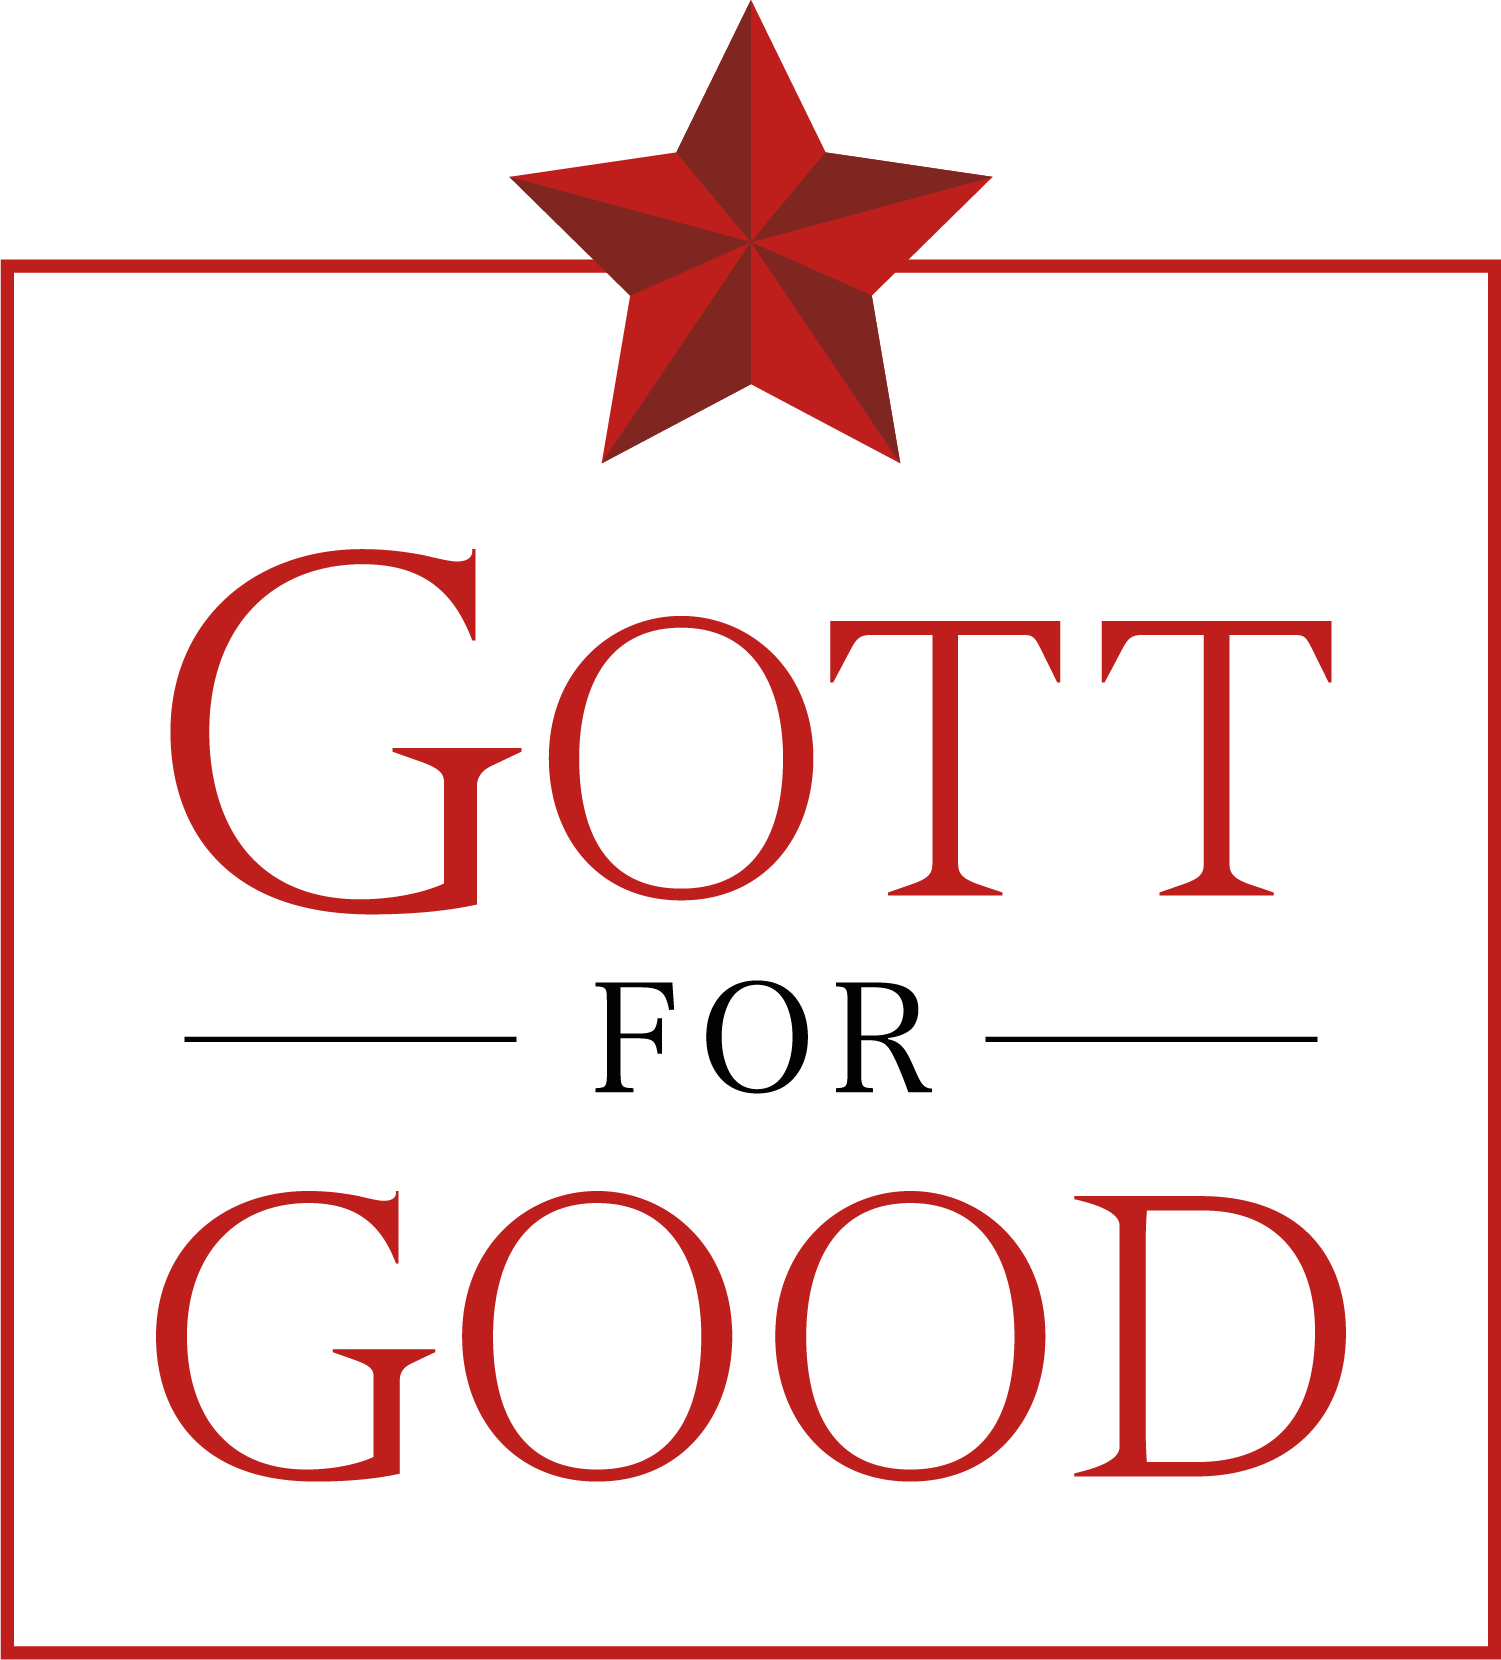 Joel Gott Wines Partners with Feeding America to Help Provide 2.5 Million Meals for Families Nationwide Through ‘Gott For Good’ Initiative